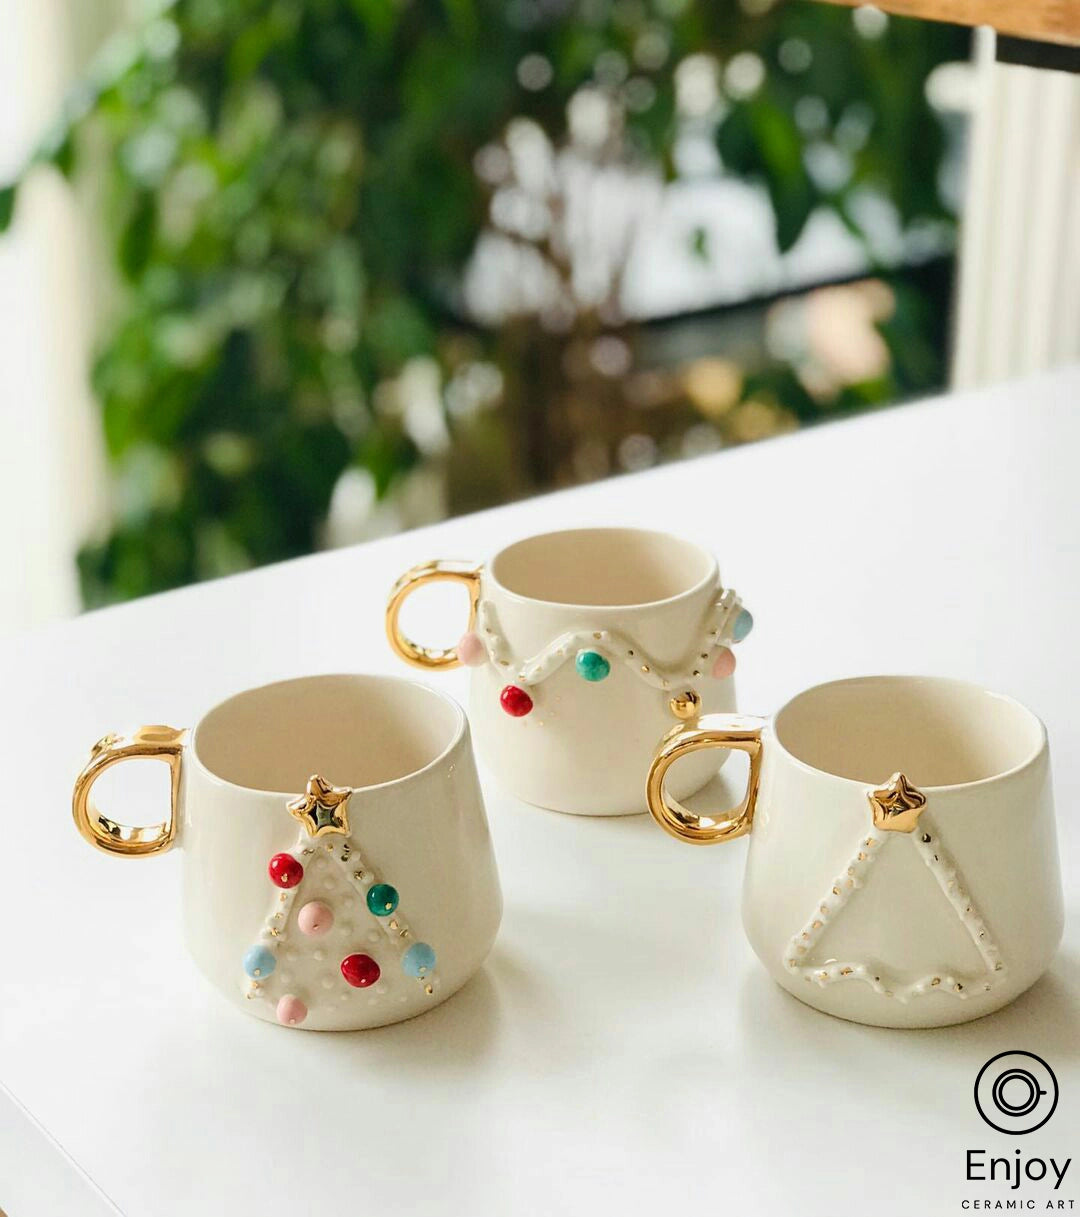 Handcrafted 'Holiday Cheer' Christmas Tree Ceramic Espresso Cup & Saucer Set - 5.4oz Festive Gift for Coffee Lovers